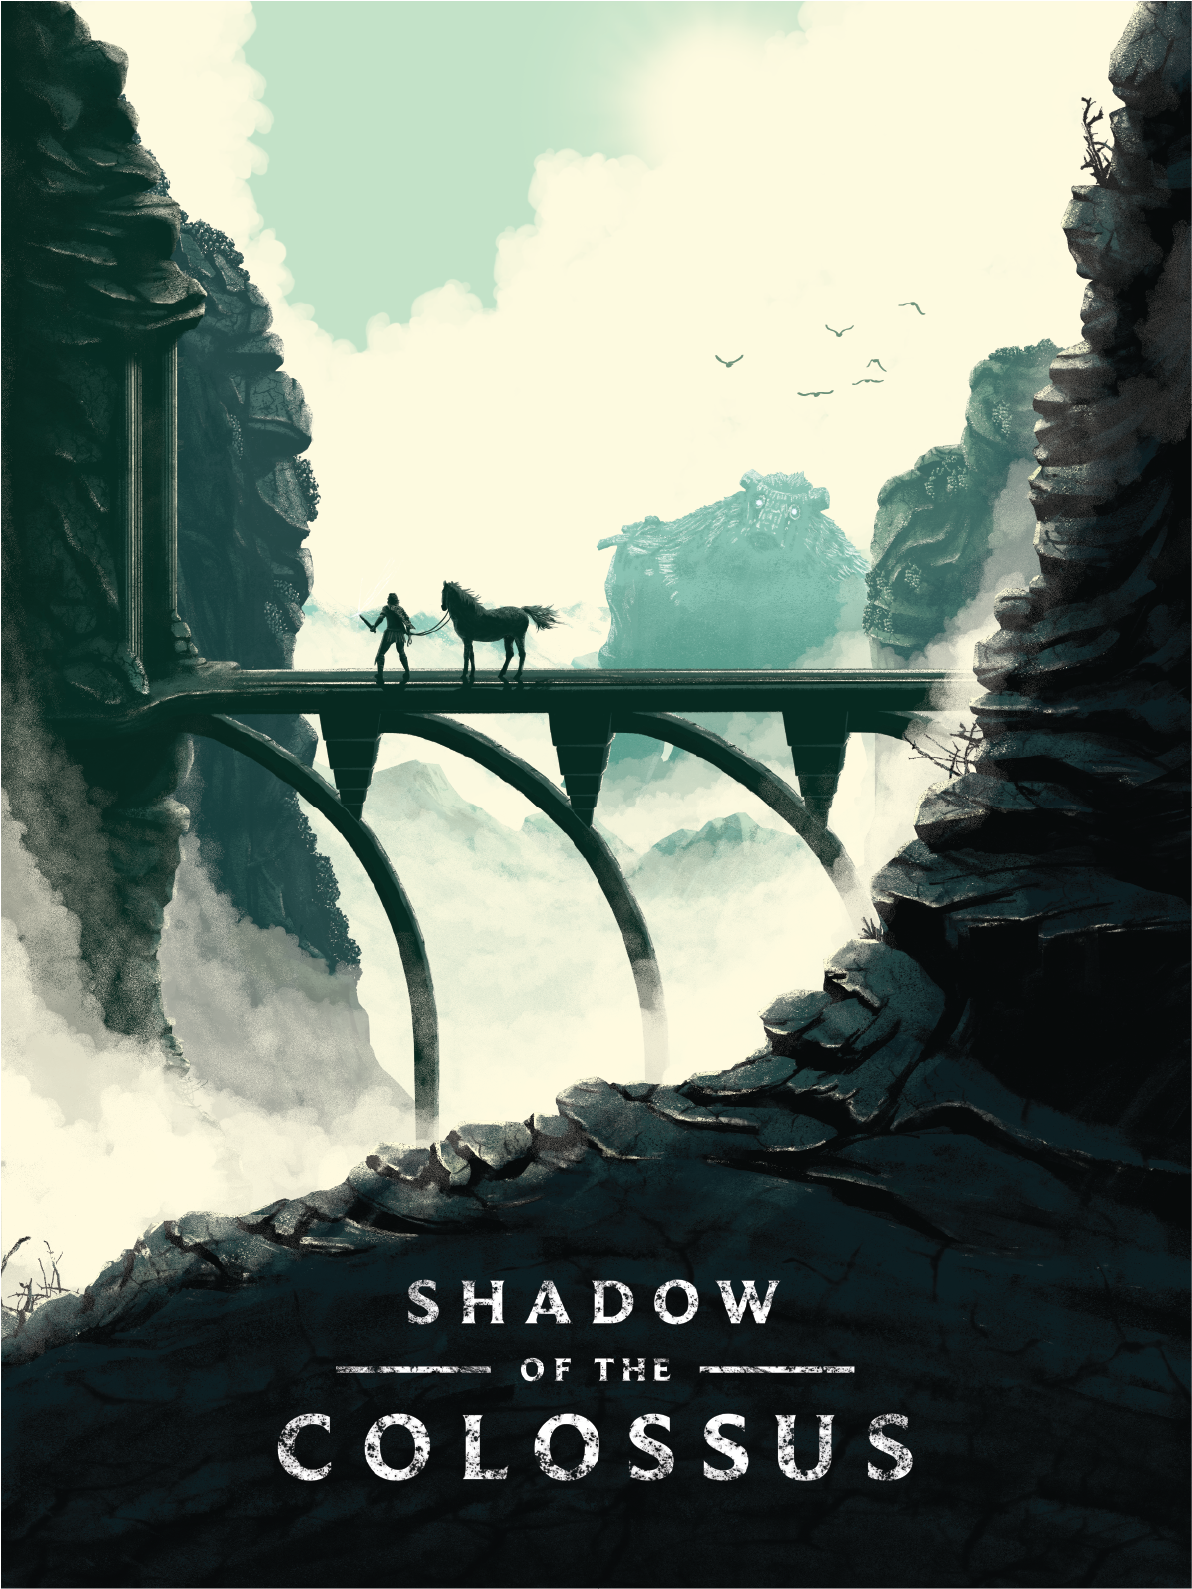 poster art giant colossus poster Landscape playstation shadow fantasy fantasy art